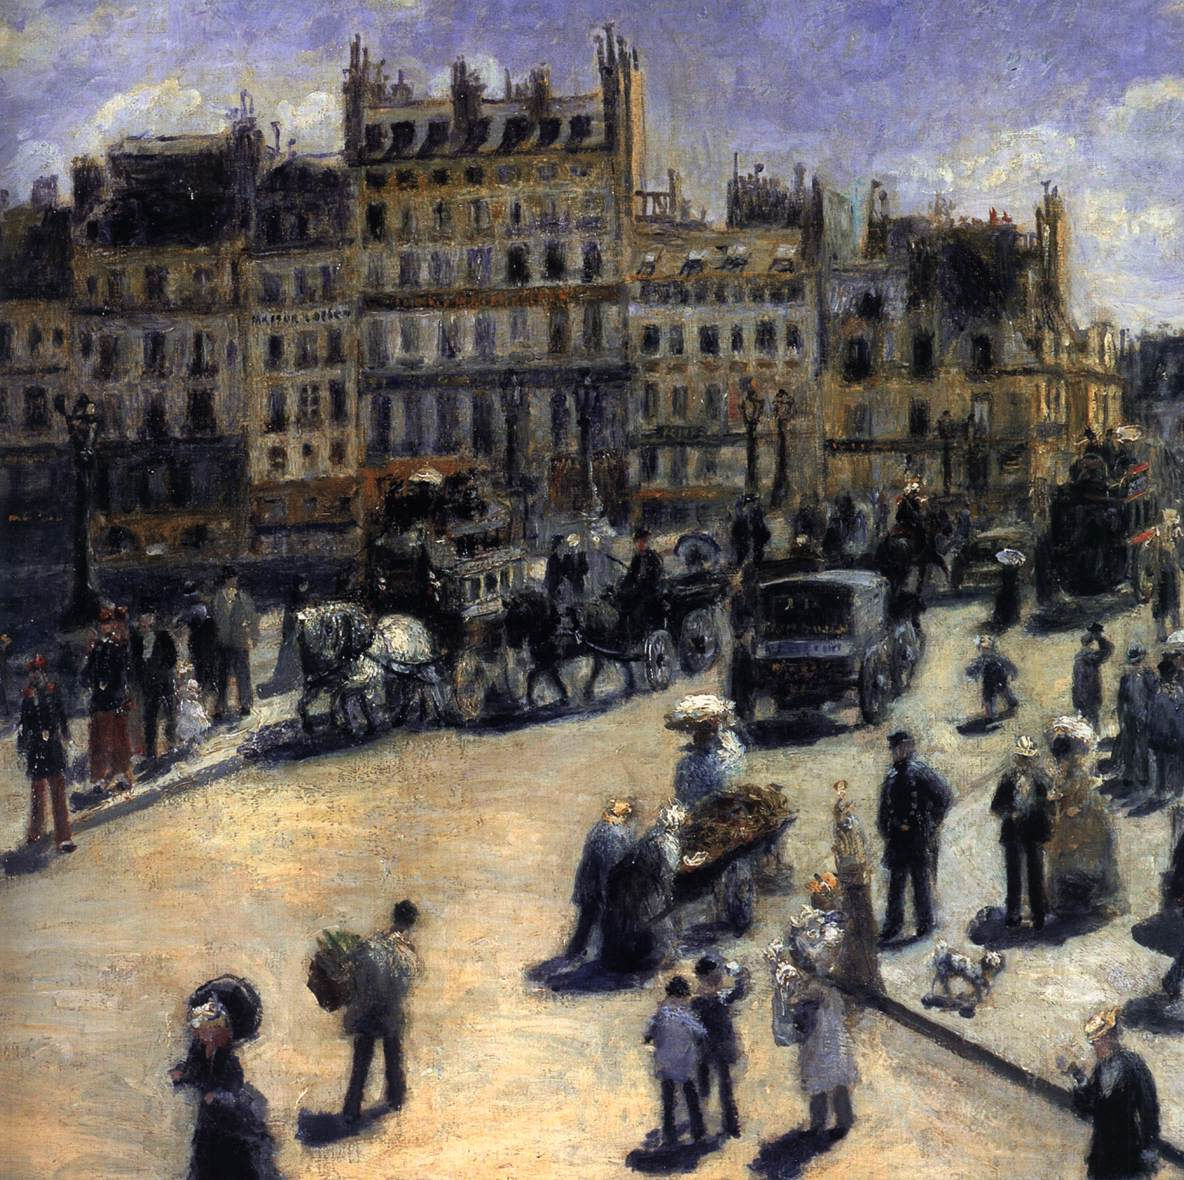 ▷ Painting Le Pont Neuf rive gauche by Dontu Grigore